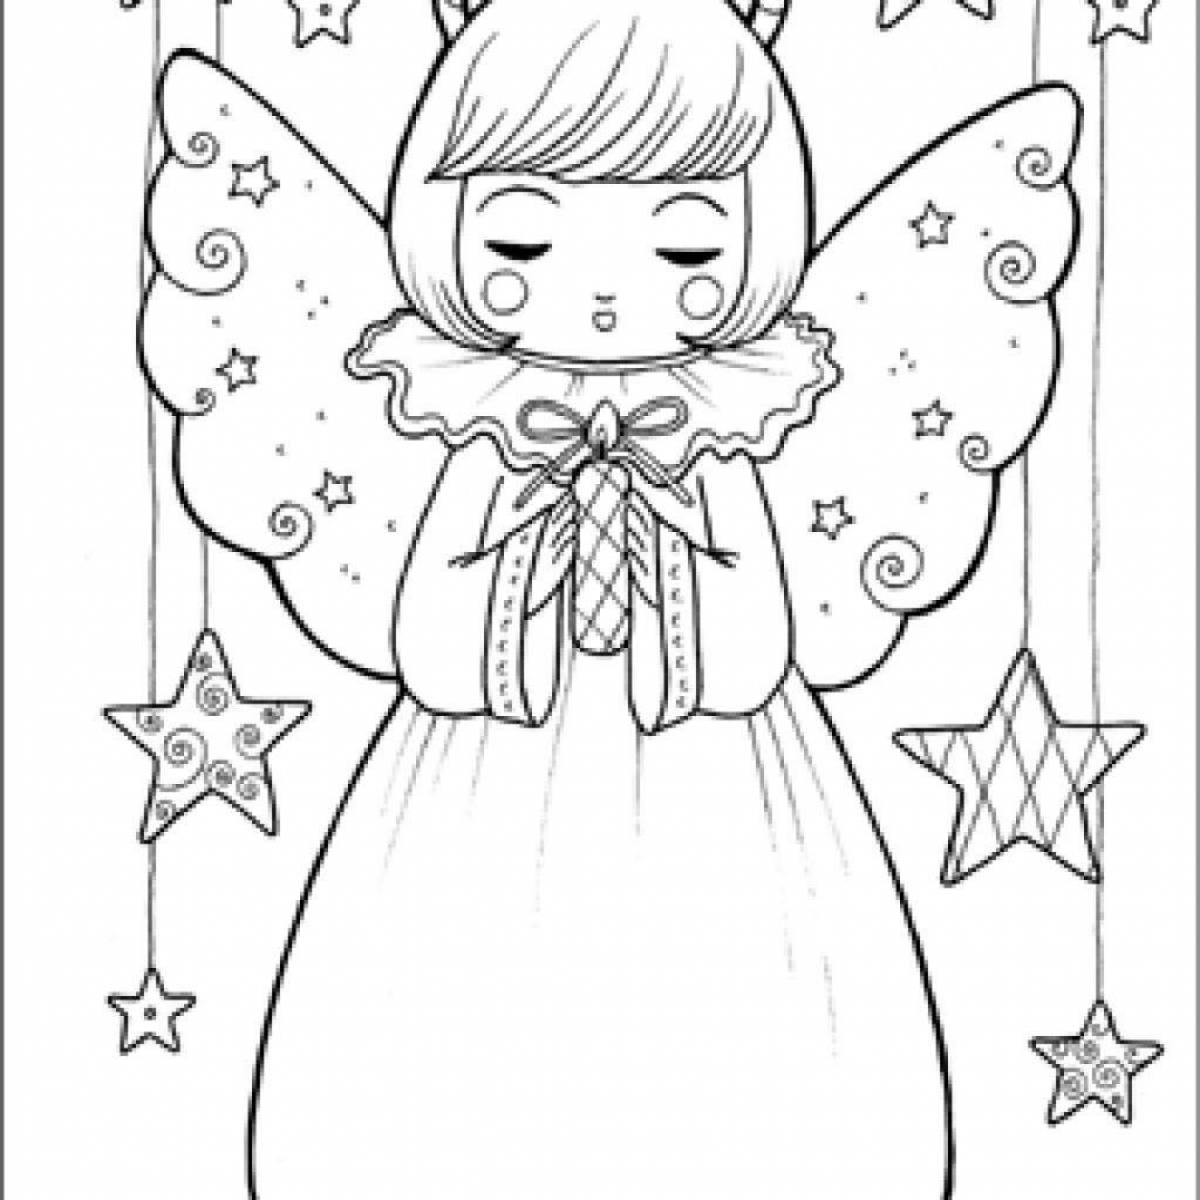 Fabulous Christmas coloring book for kids